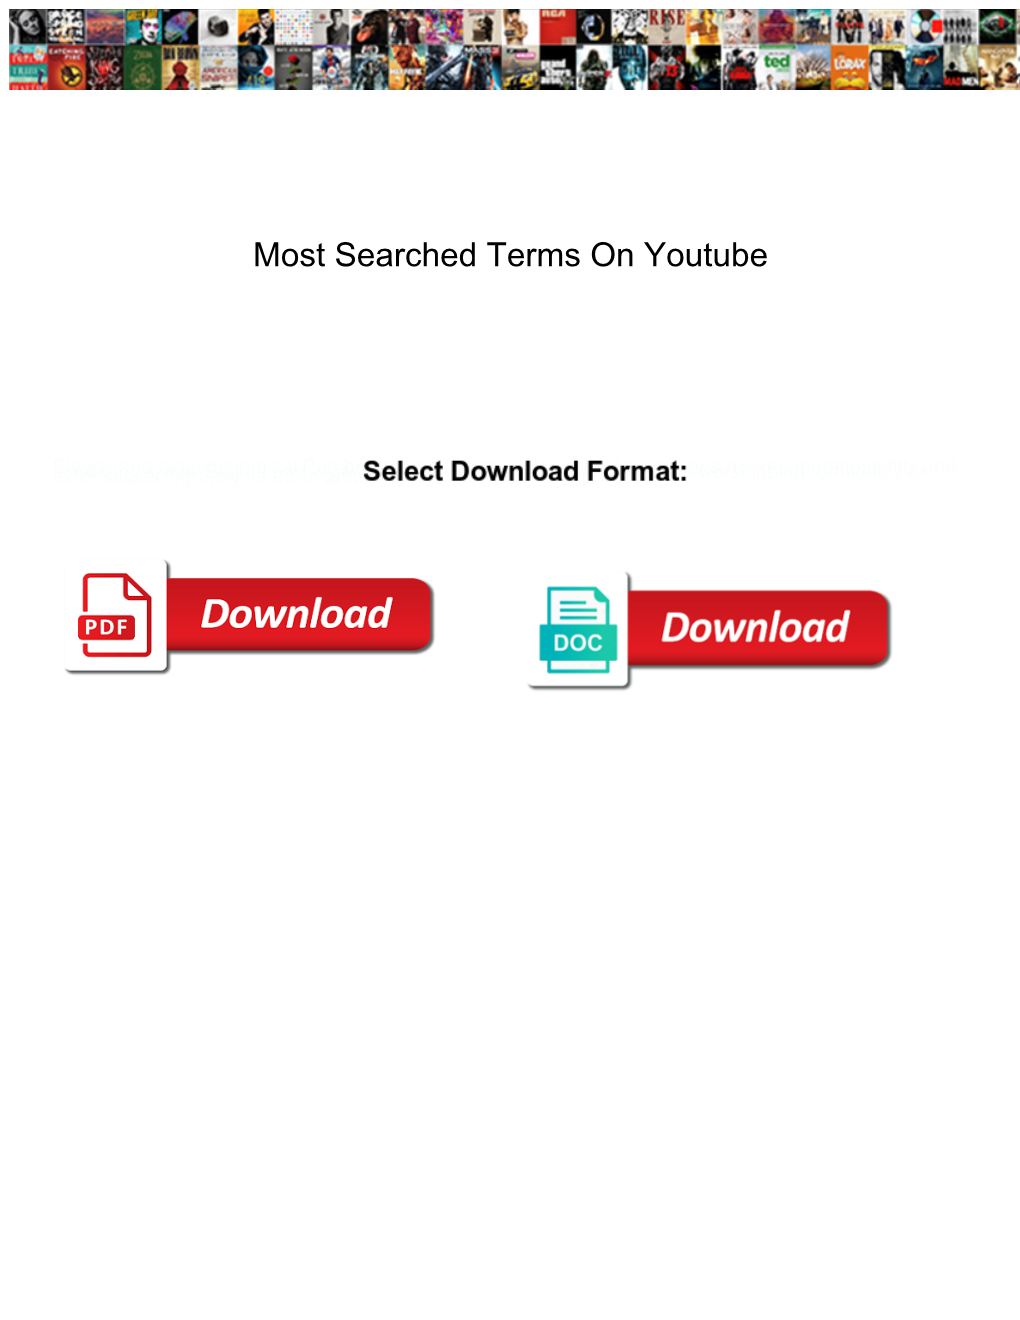 Most Searched Terms on Youtube